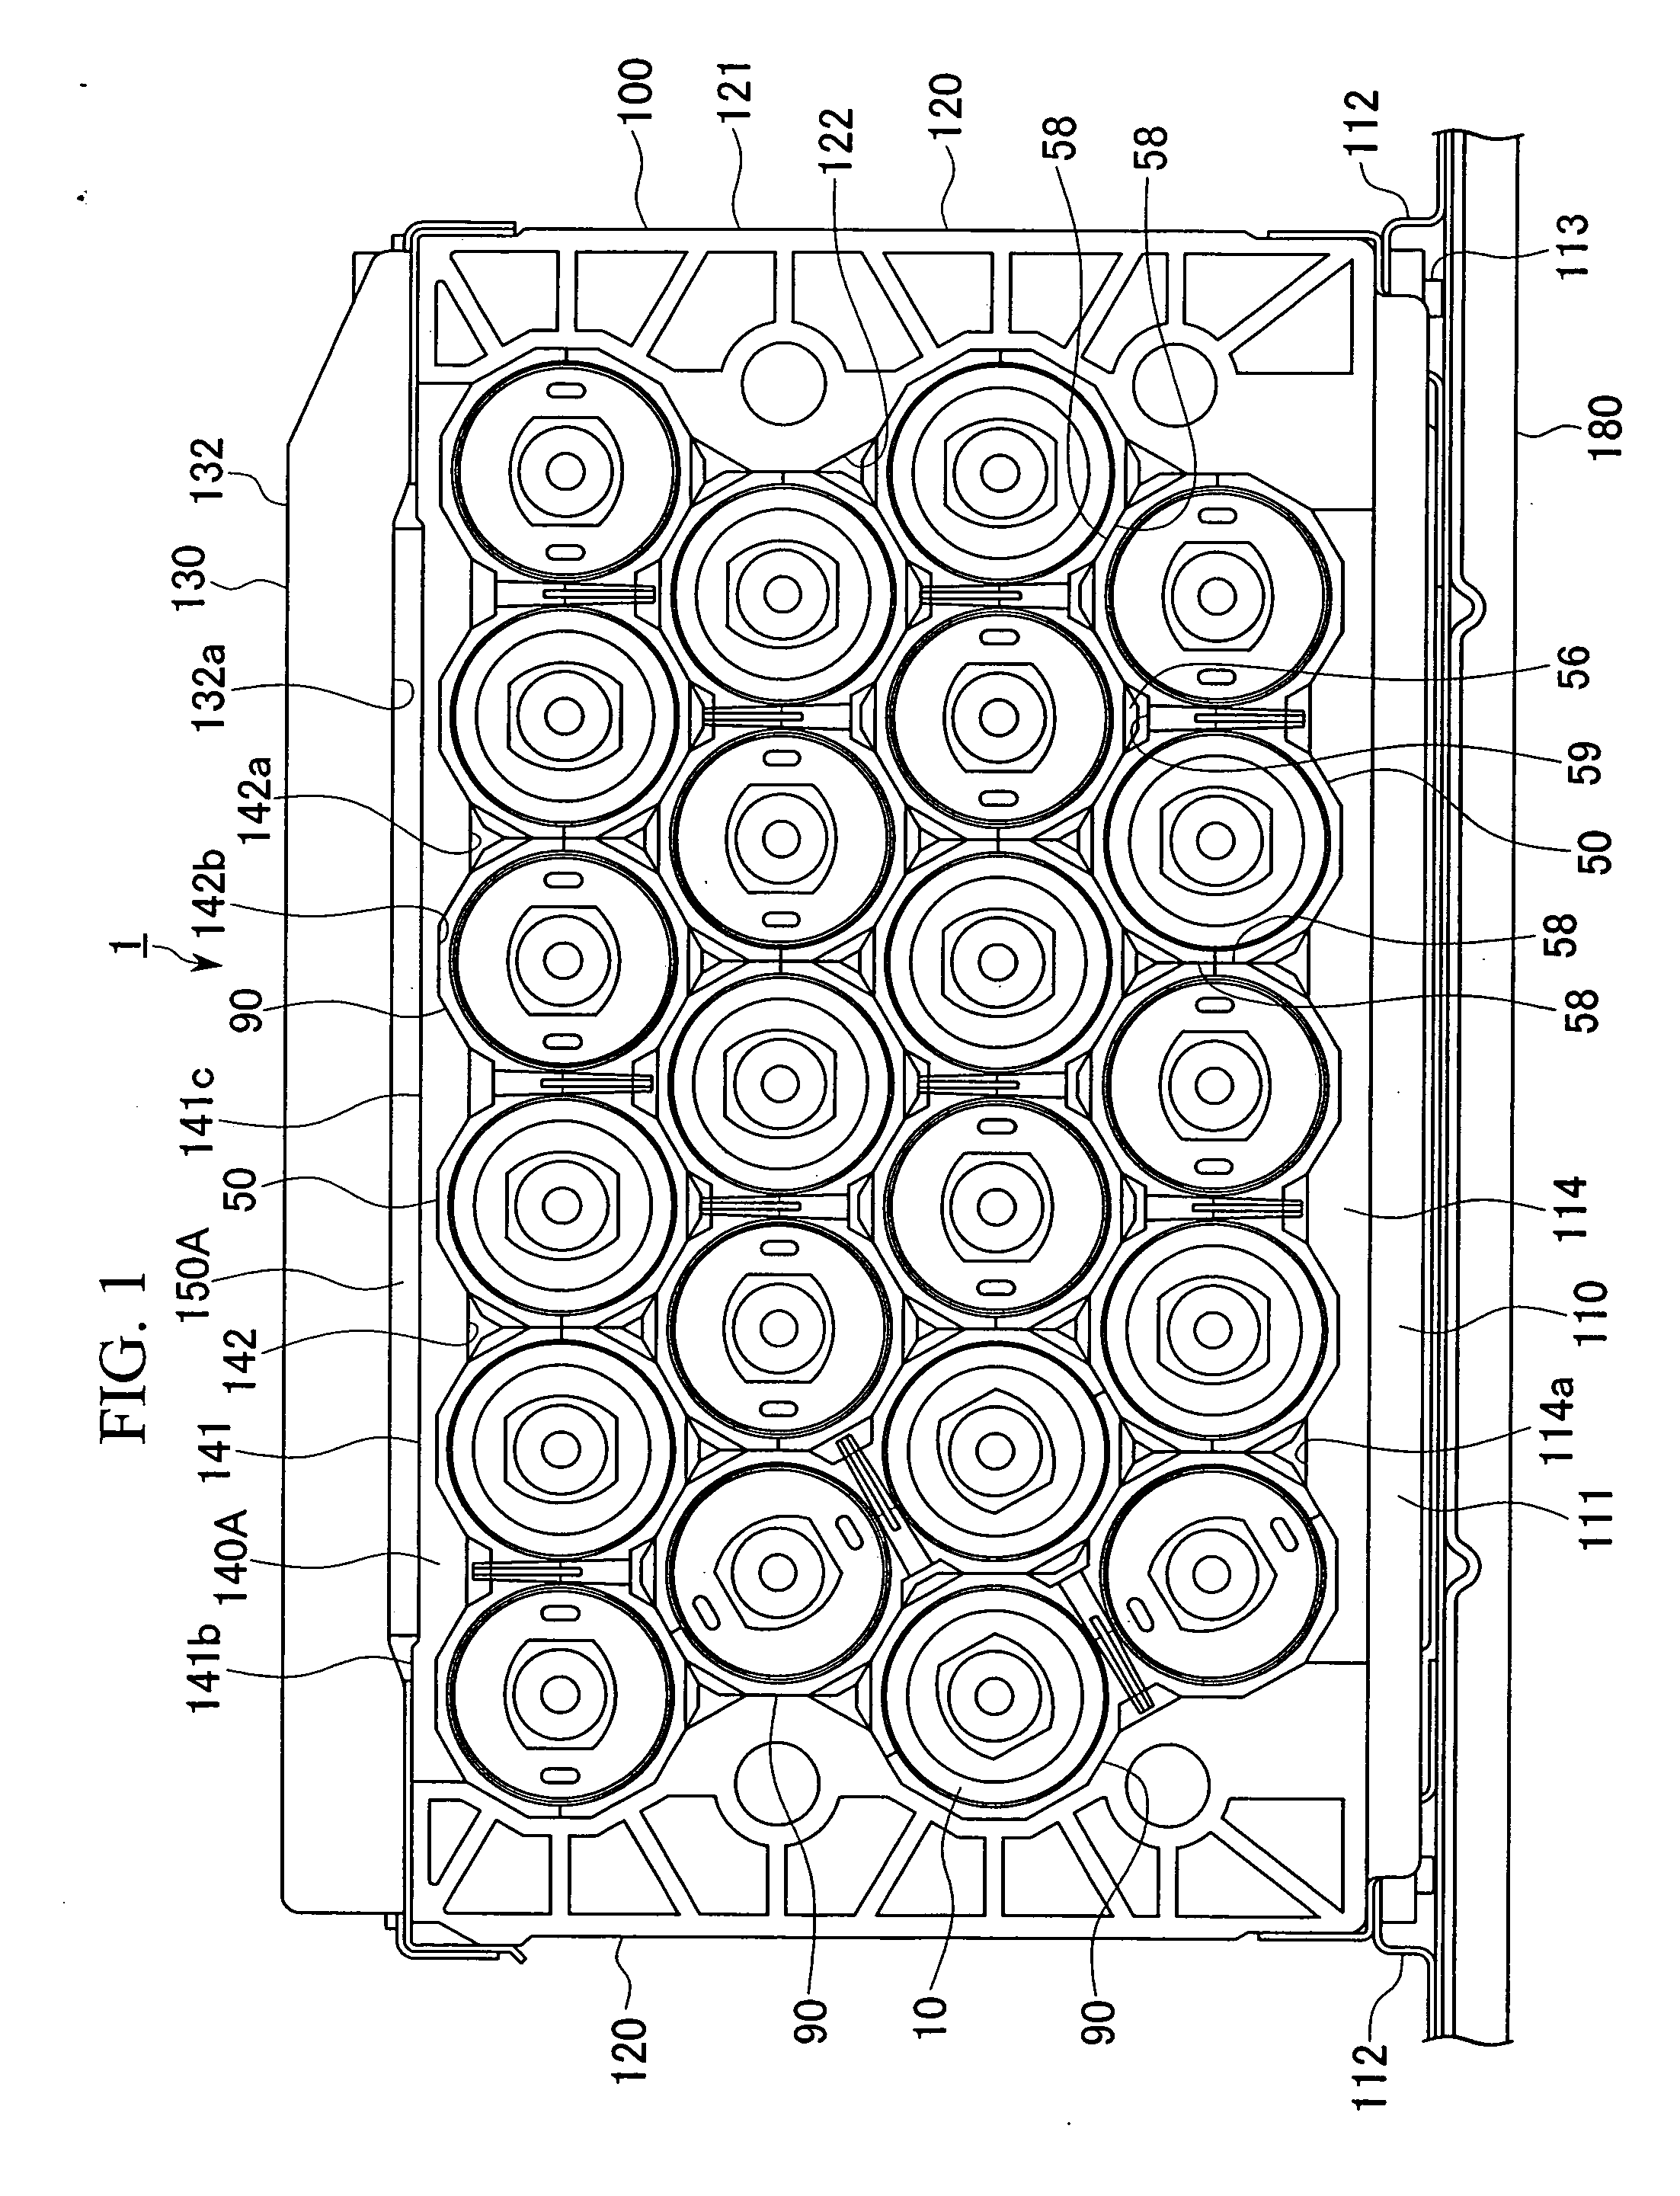 Battery pack having elastic body inserted between members for holding cell modules and frame of battery pack